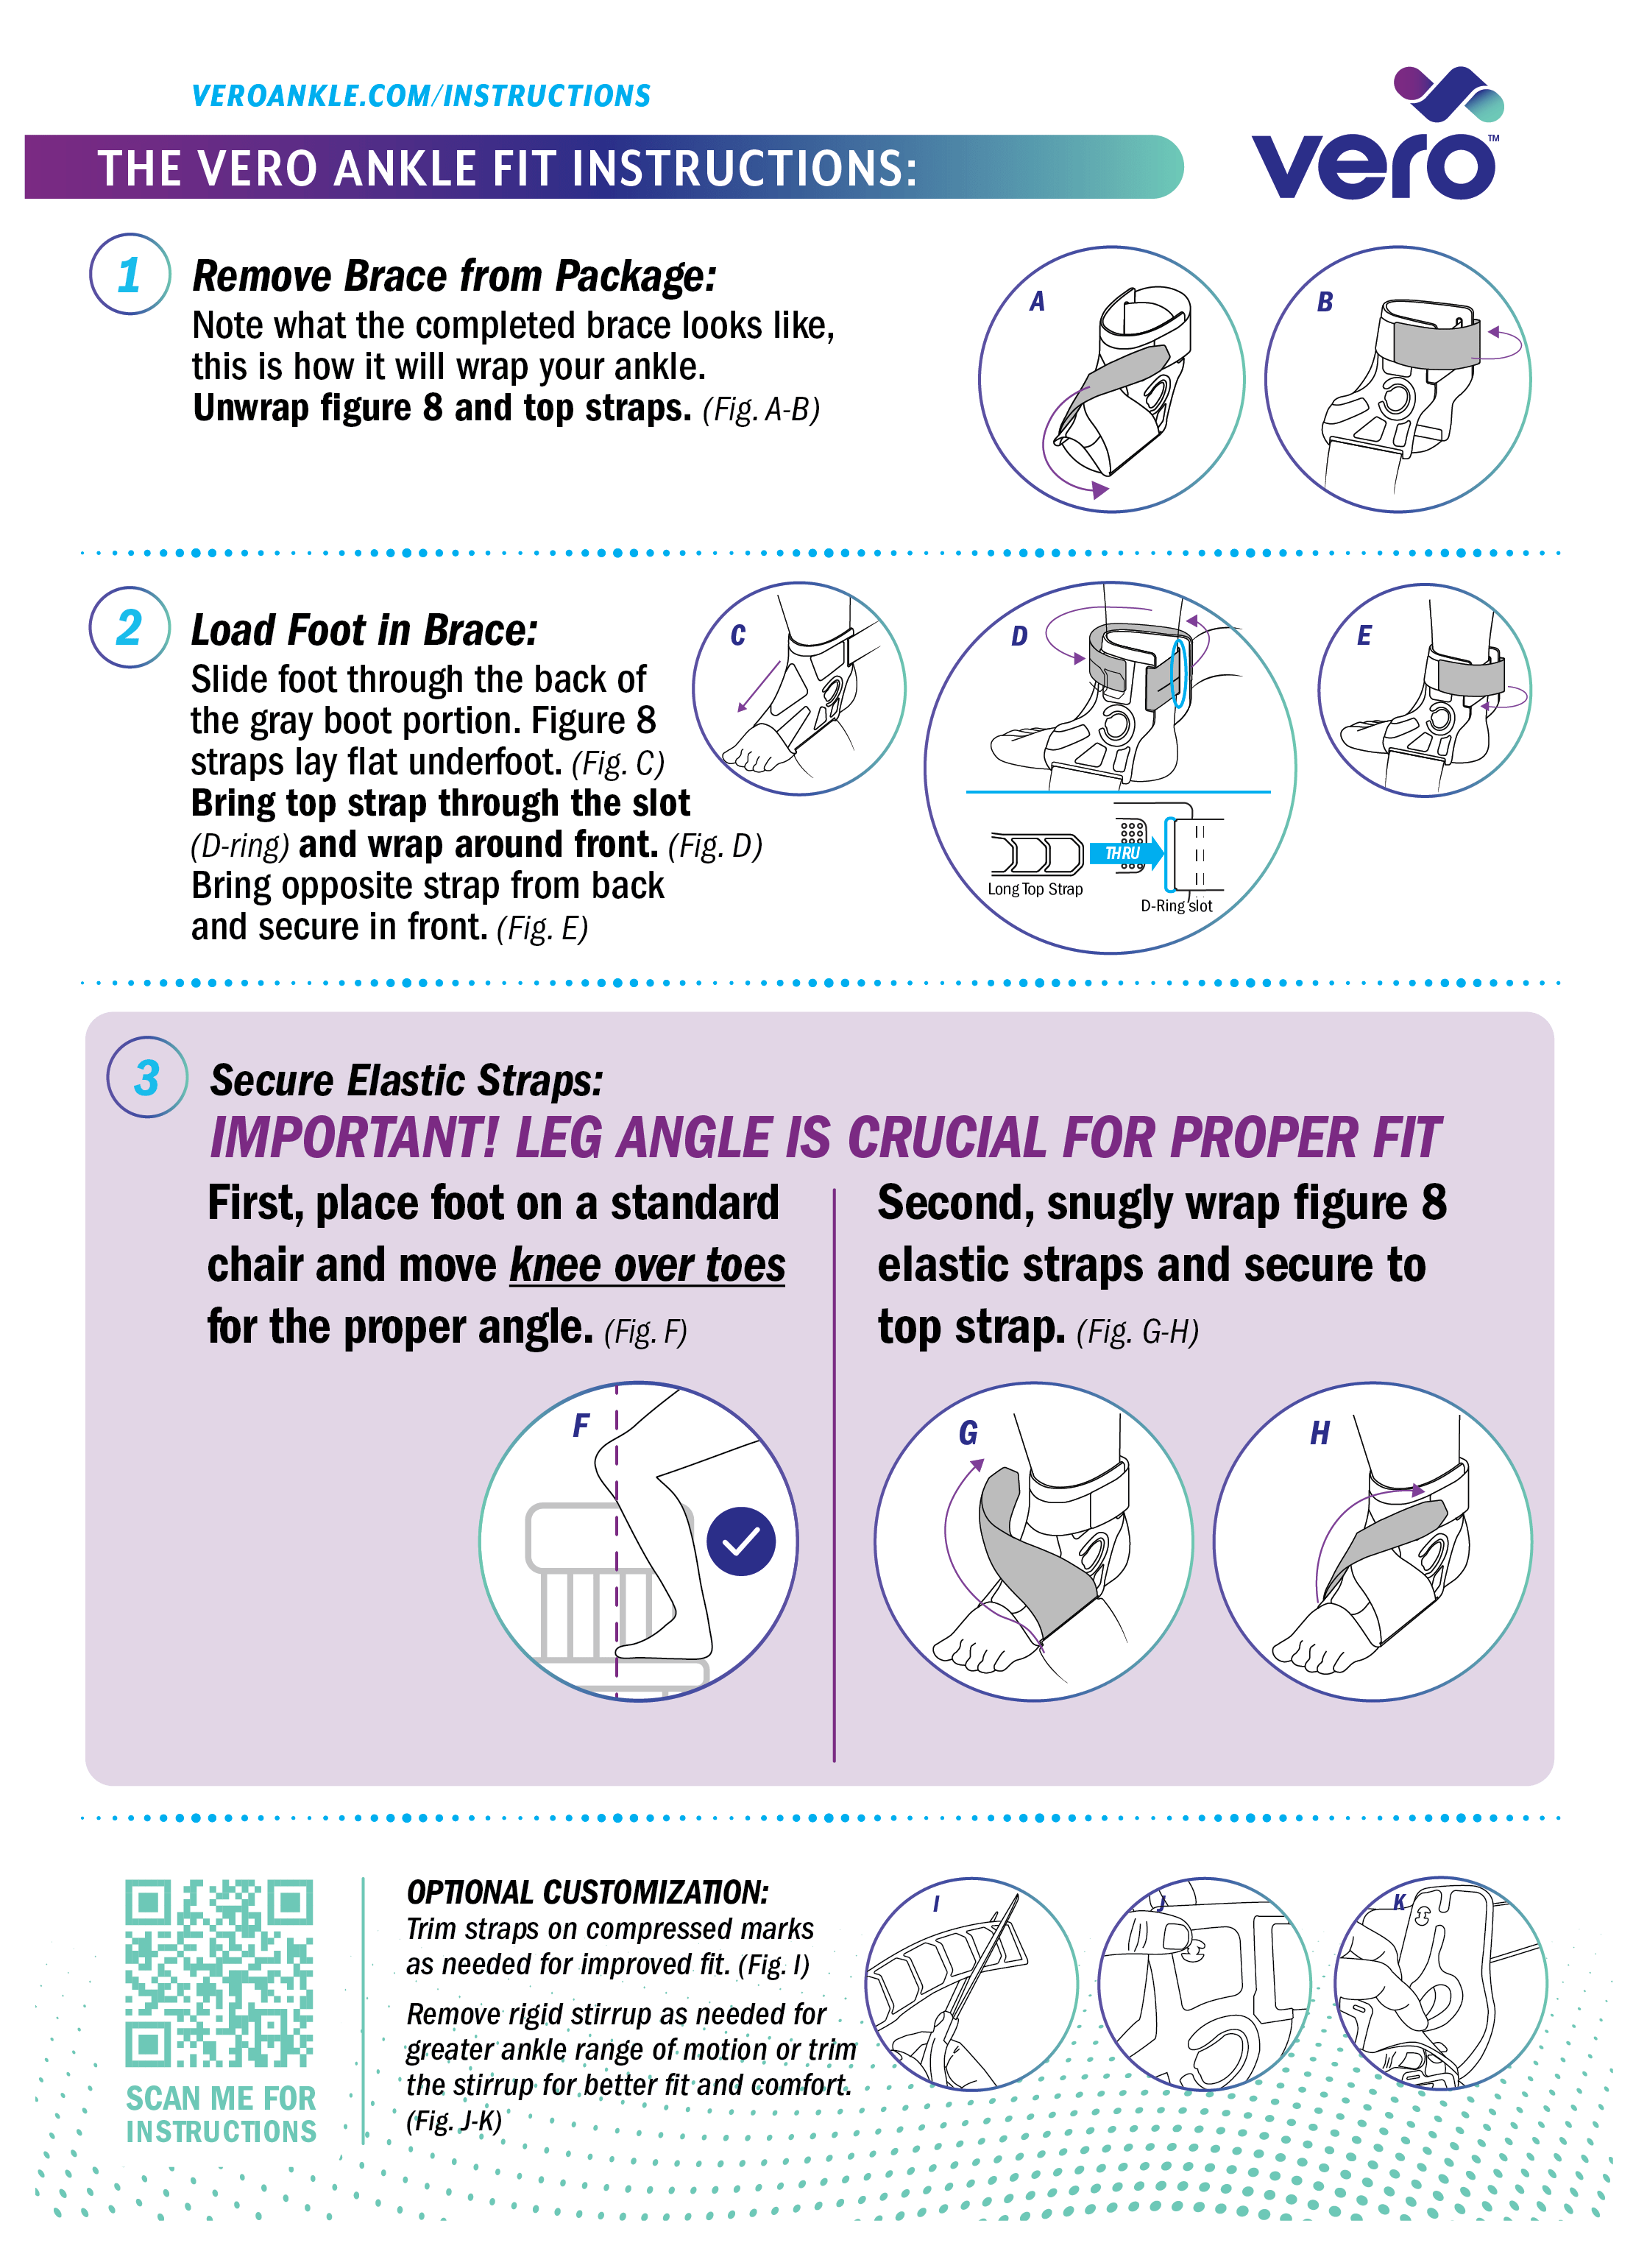 The Vero Ankle Fit Instructions Image